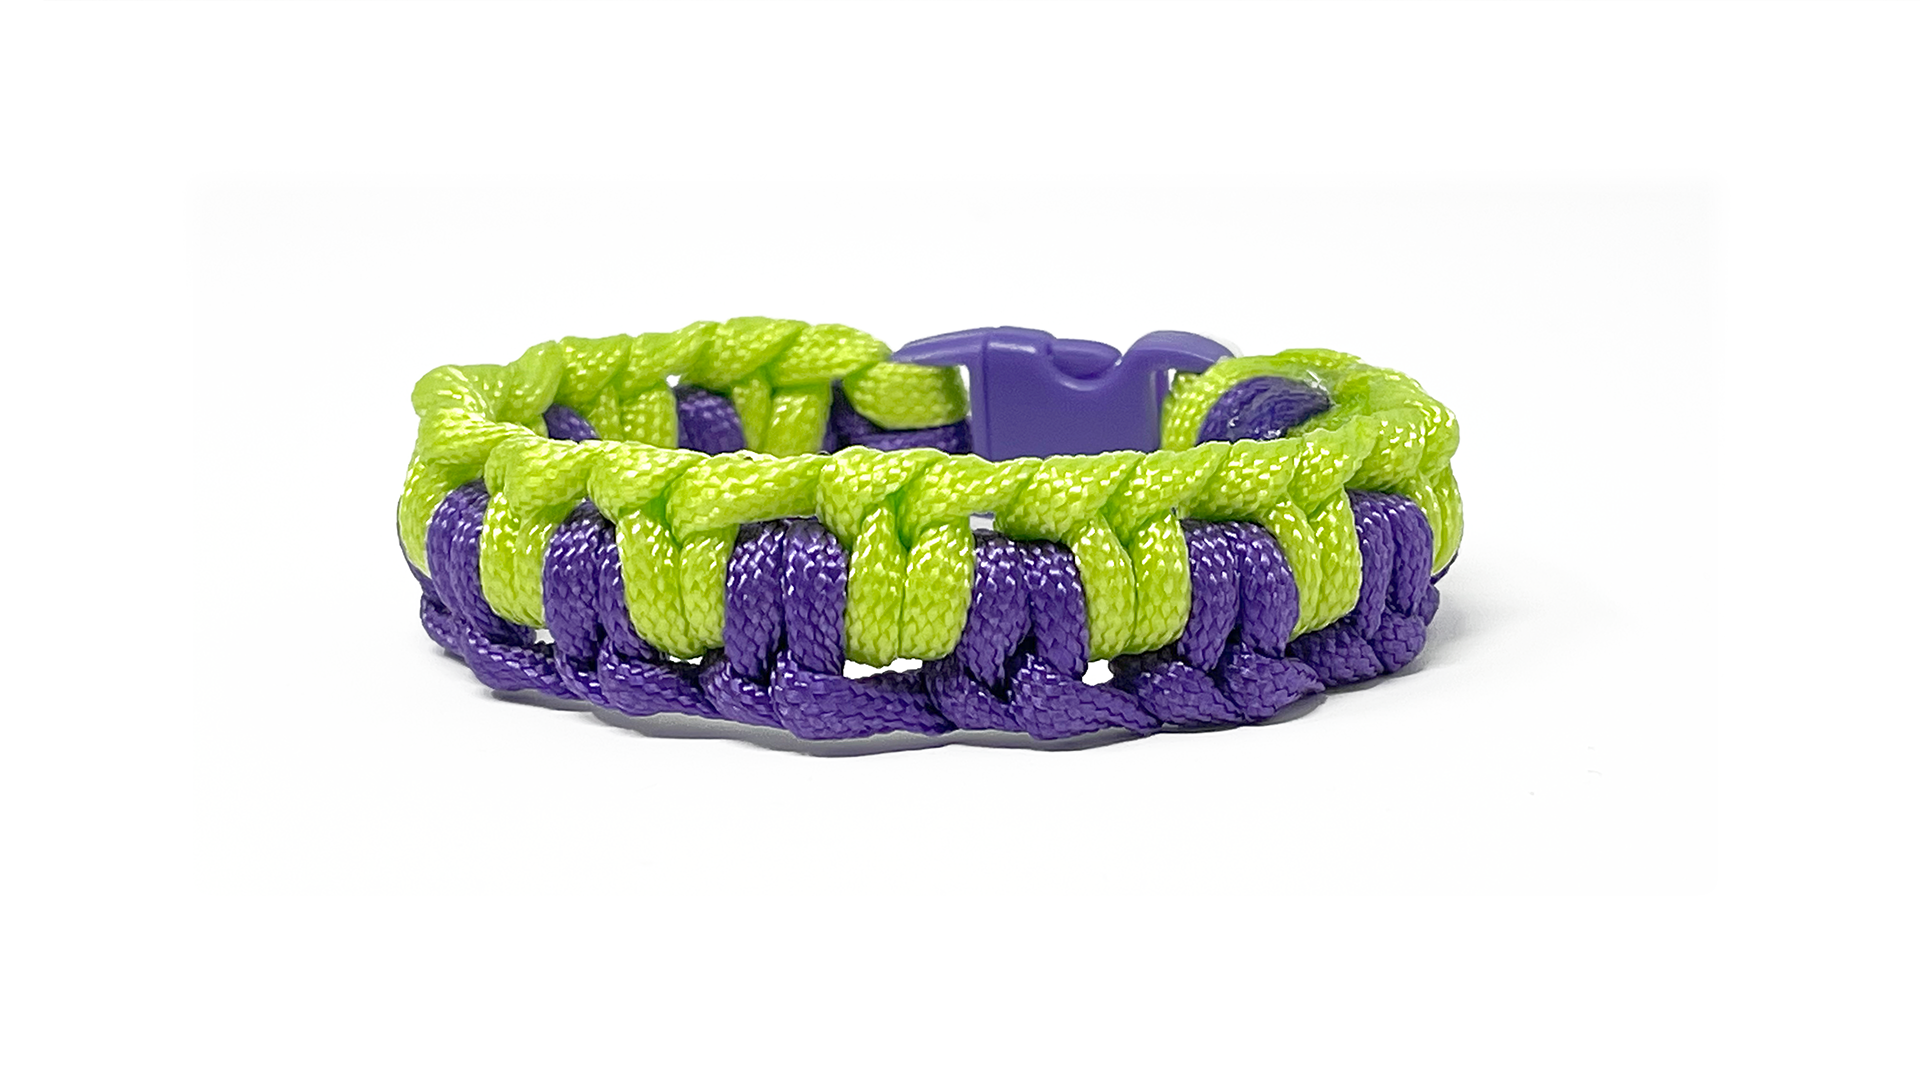 Brightly colored paracord bracelet, Purple and Green paracord bracelet, survival 550 cord bracelet tutorial, half hitch knot, zipper knot, Pinwheel Crafts, diy projects, all-in-one craft kits for kids, activities for boys and girls